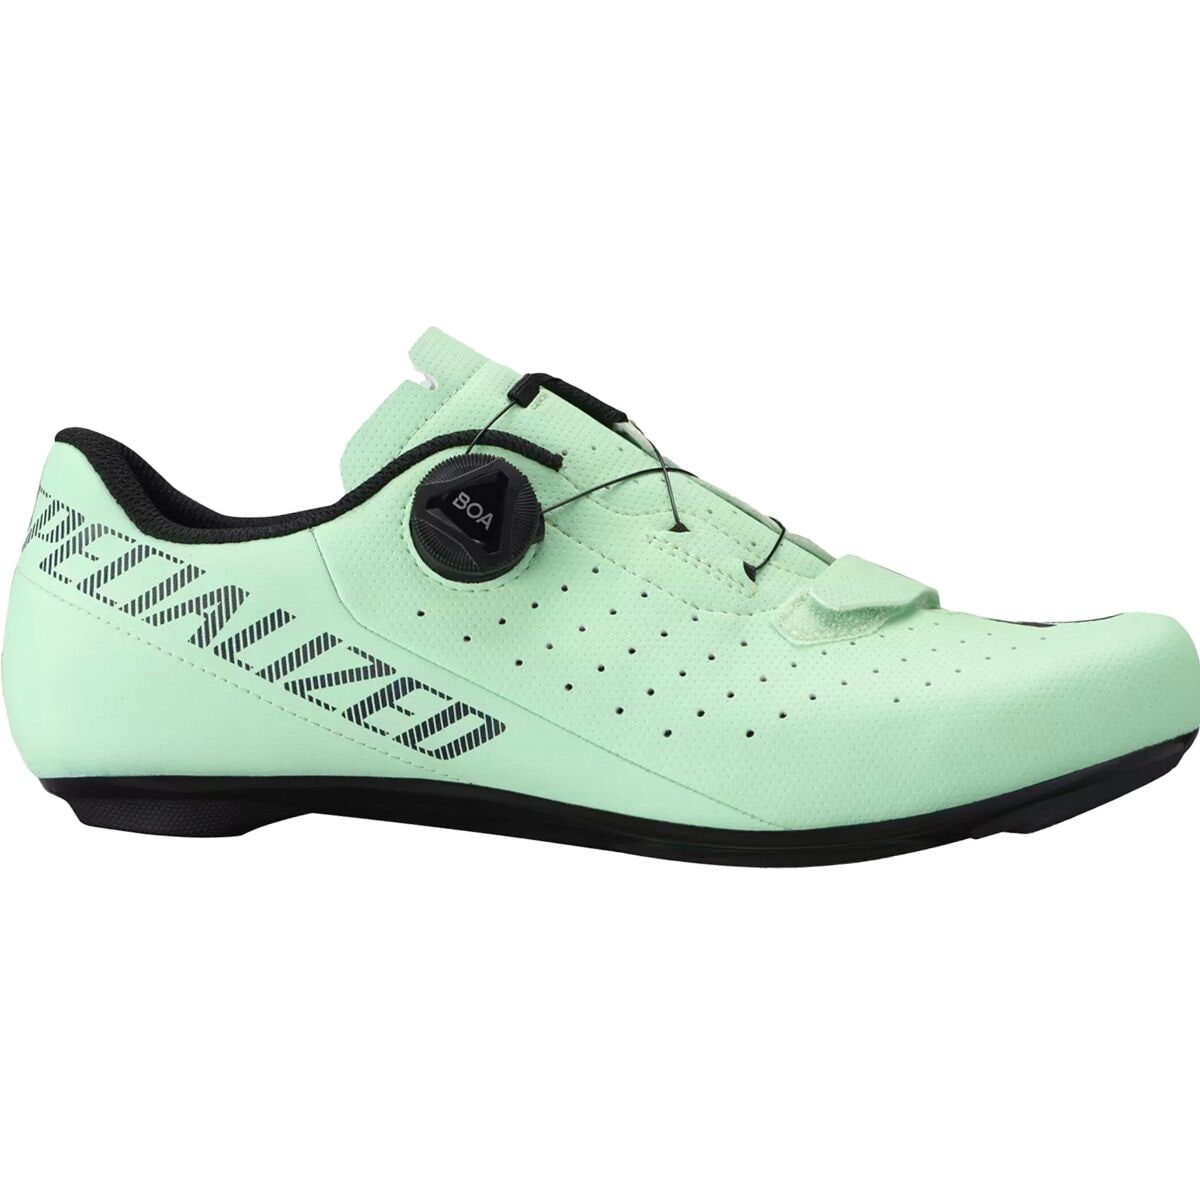 Specialized Torch 1.0 Cycling Shoe Oasis, 48.0 - Men's